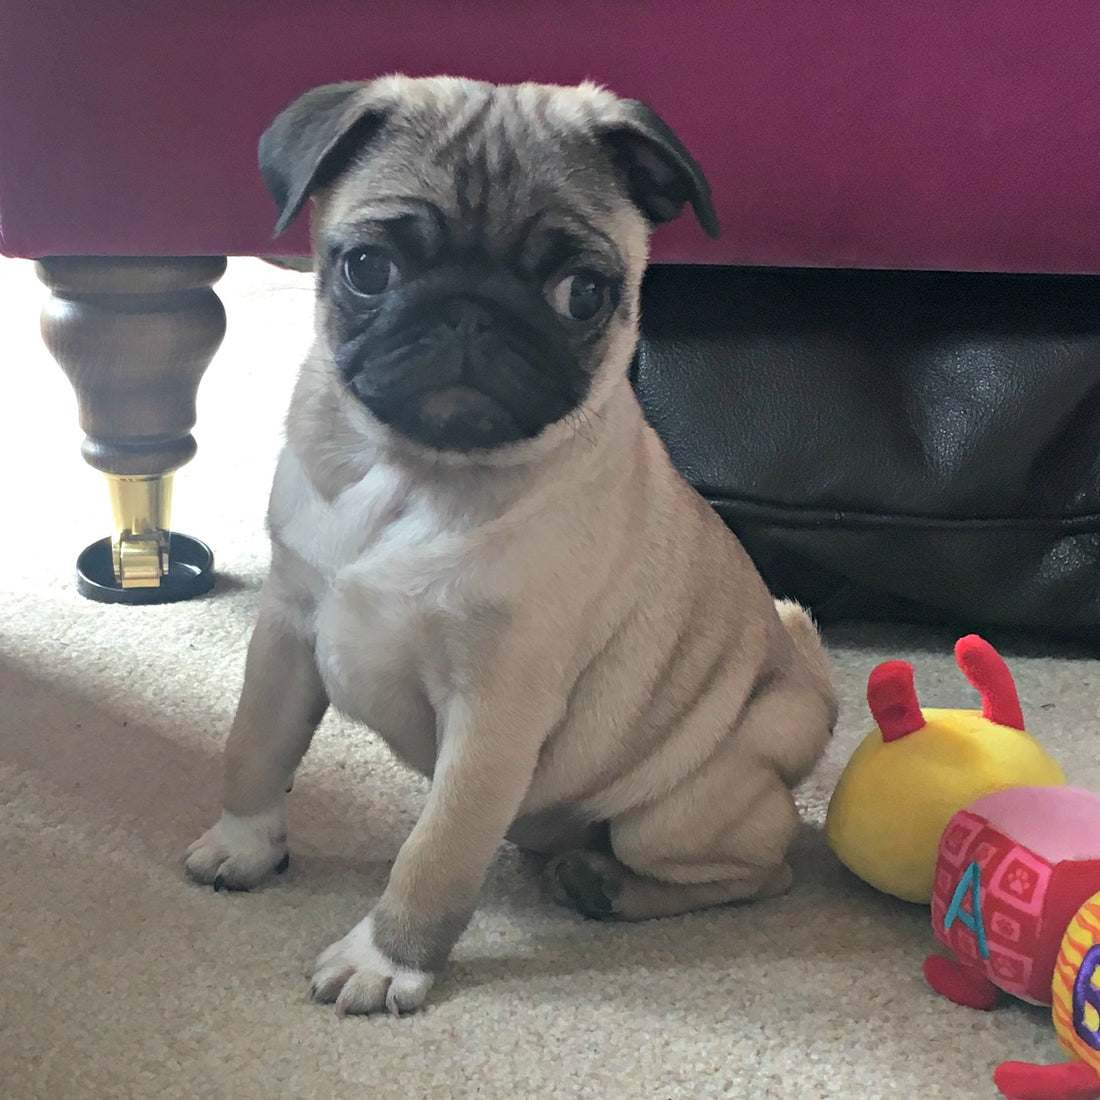 New beginnings: April the pug puppy joins the team